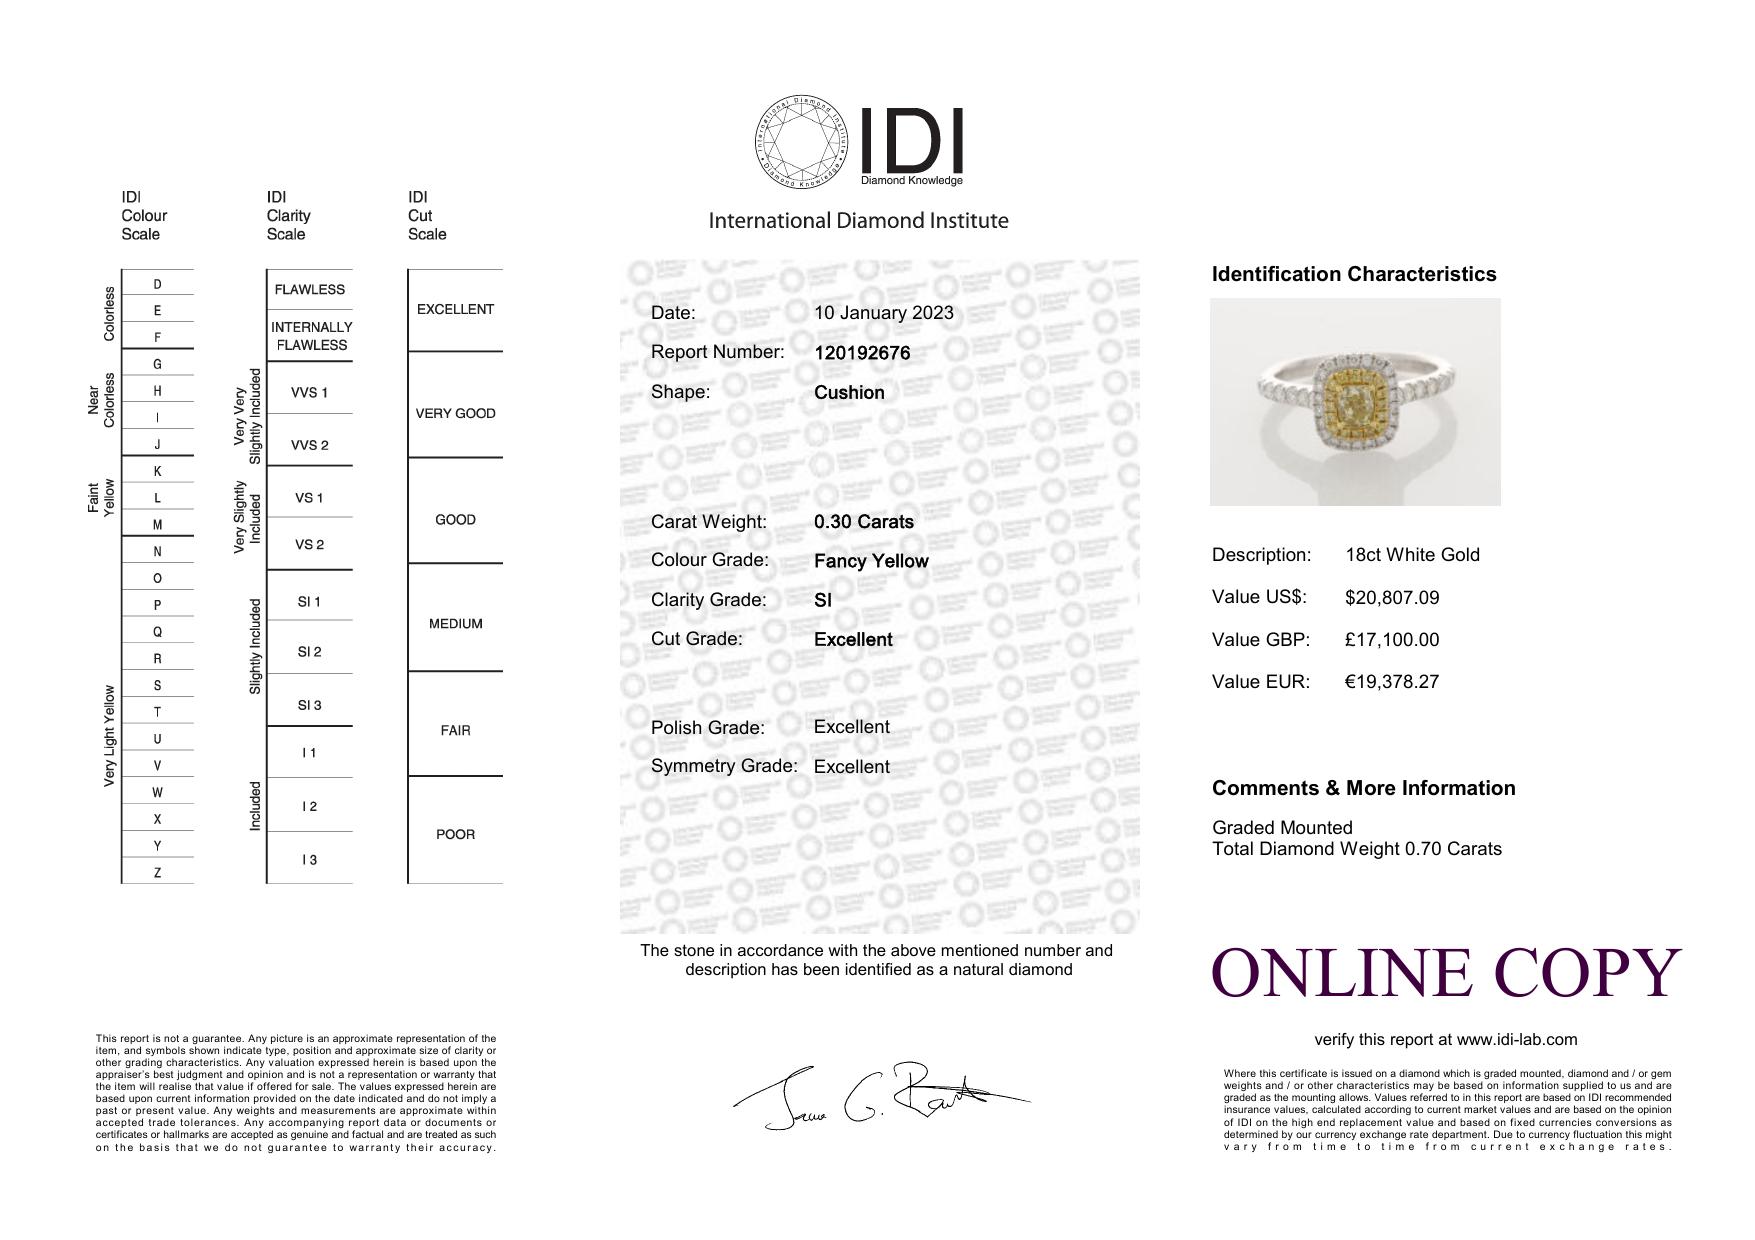 18ct White Gold Single Stone With Halo Setting Ring (0.30) 0.70 Carats - Valued By IDI £17,100. - Image 5 of 5